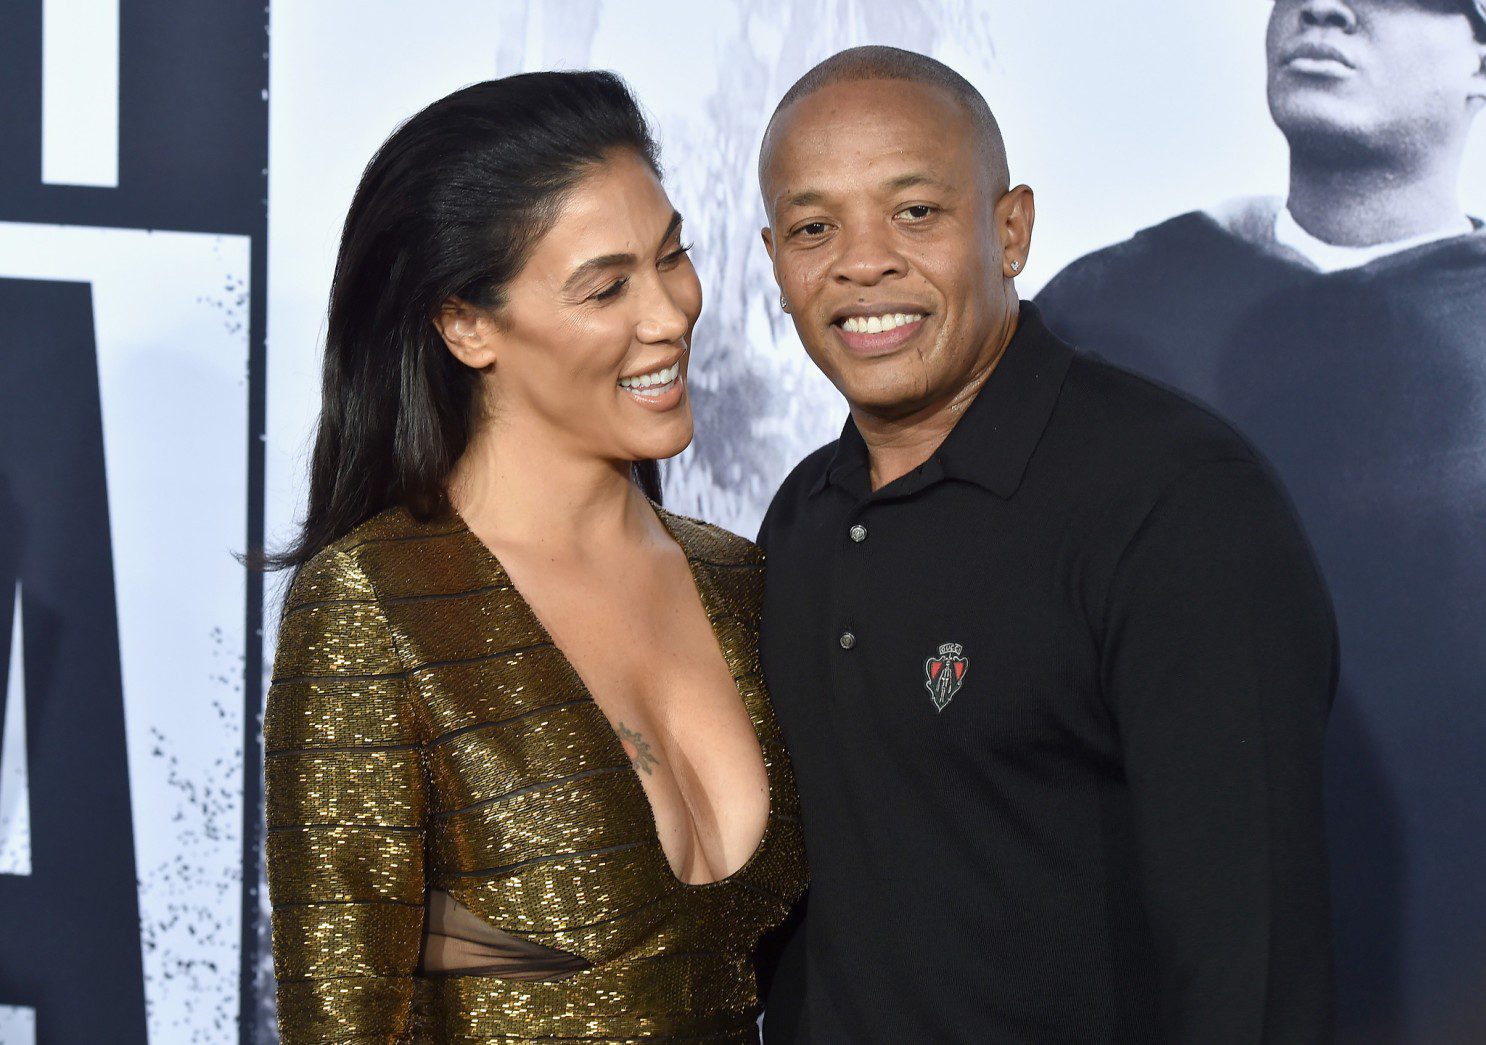 Who Is Dr. Dre Dating?